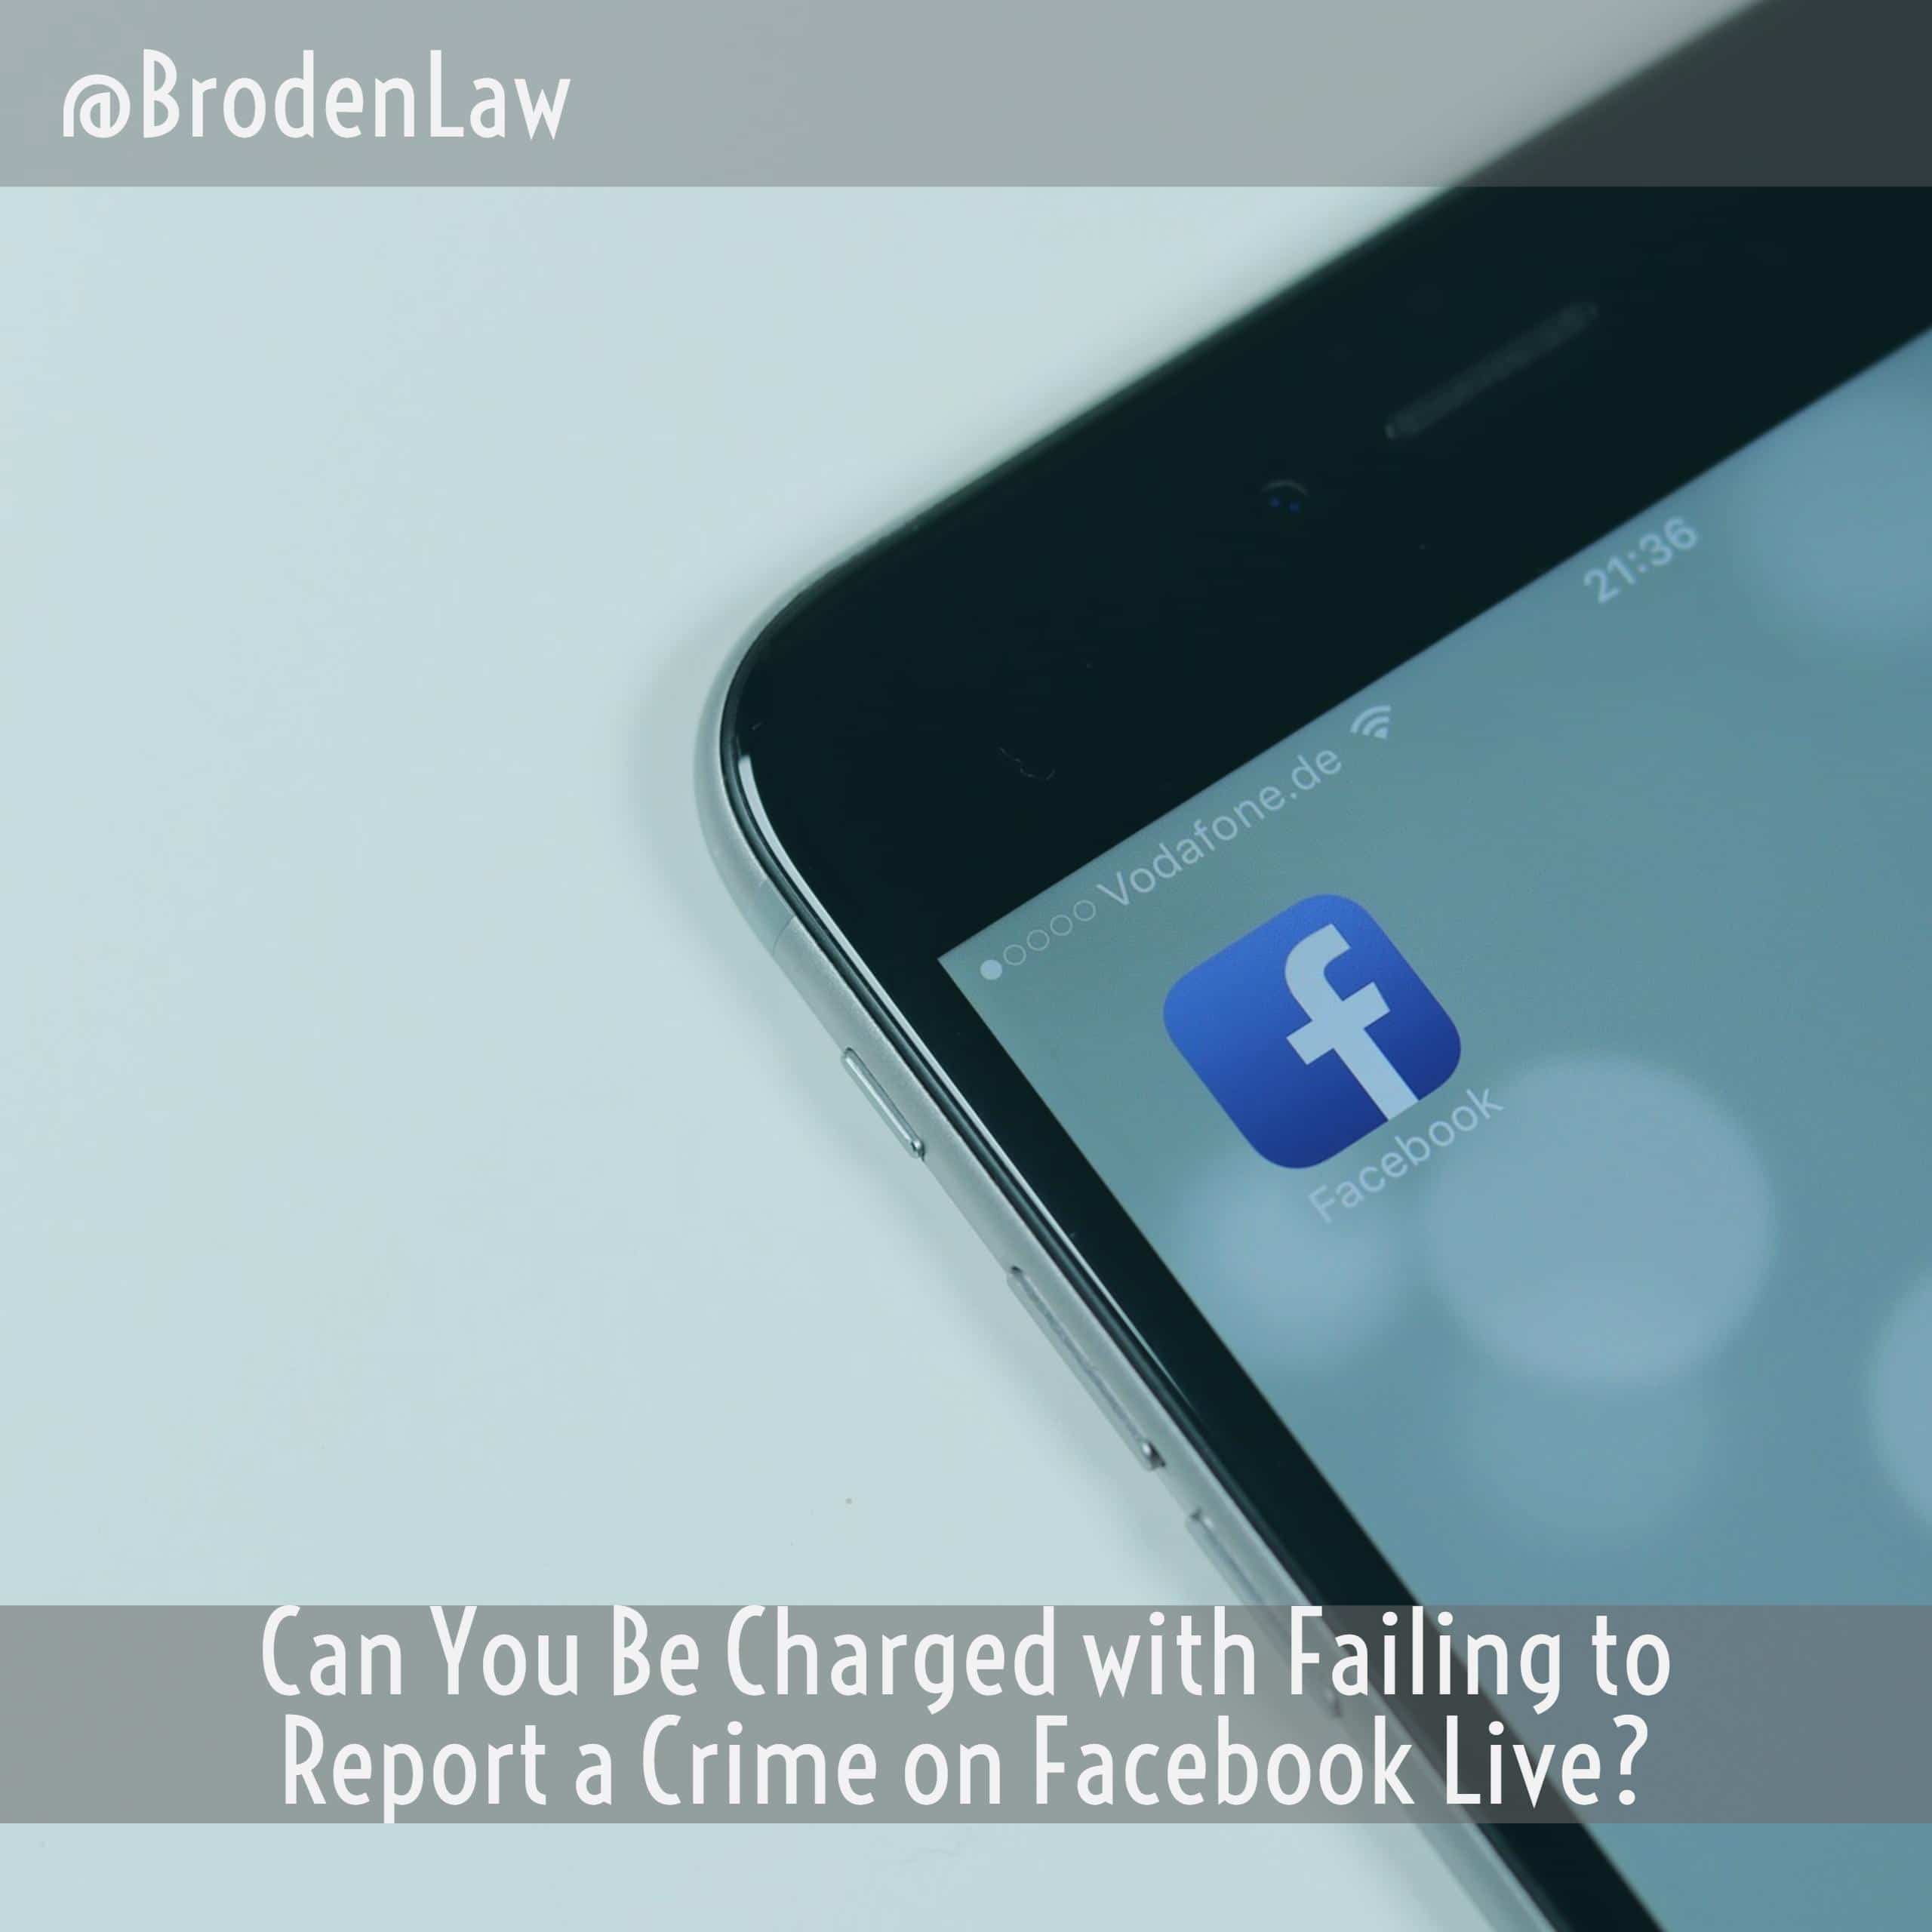 Can You Be Charged with Failing to Report a Crime on Facebook Live